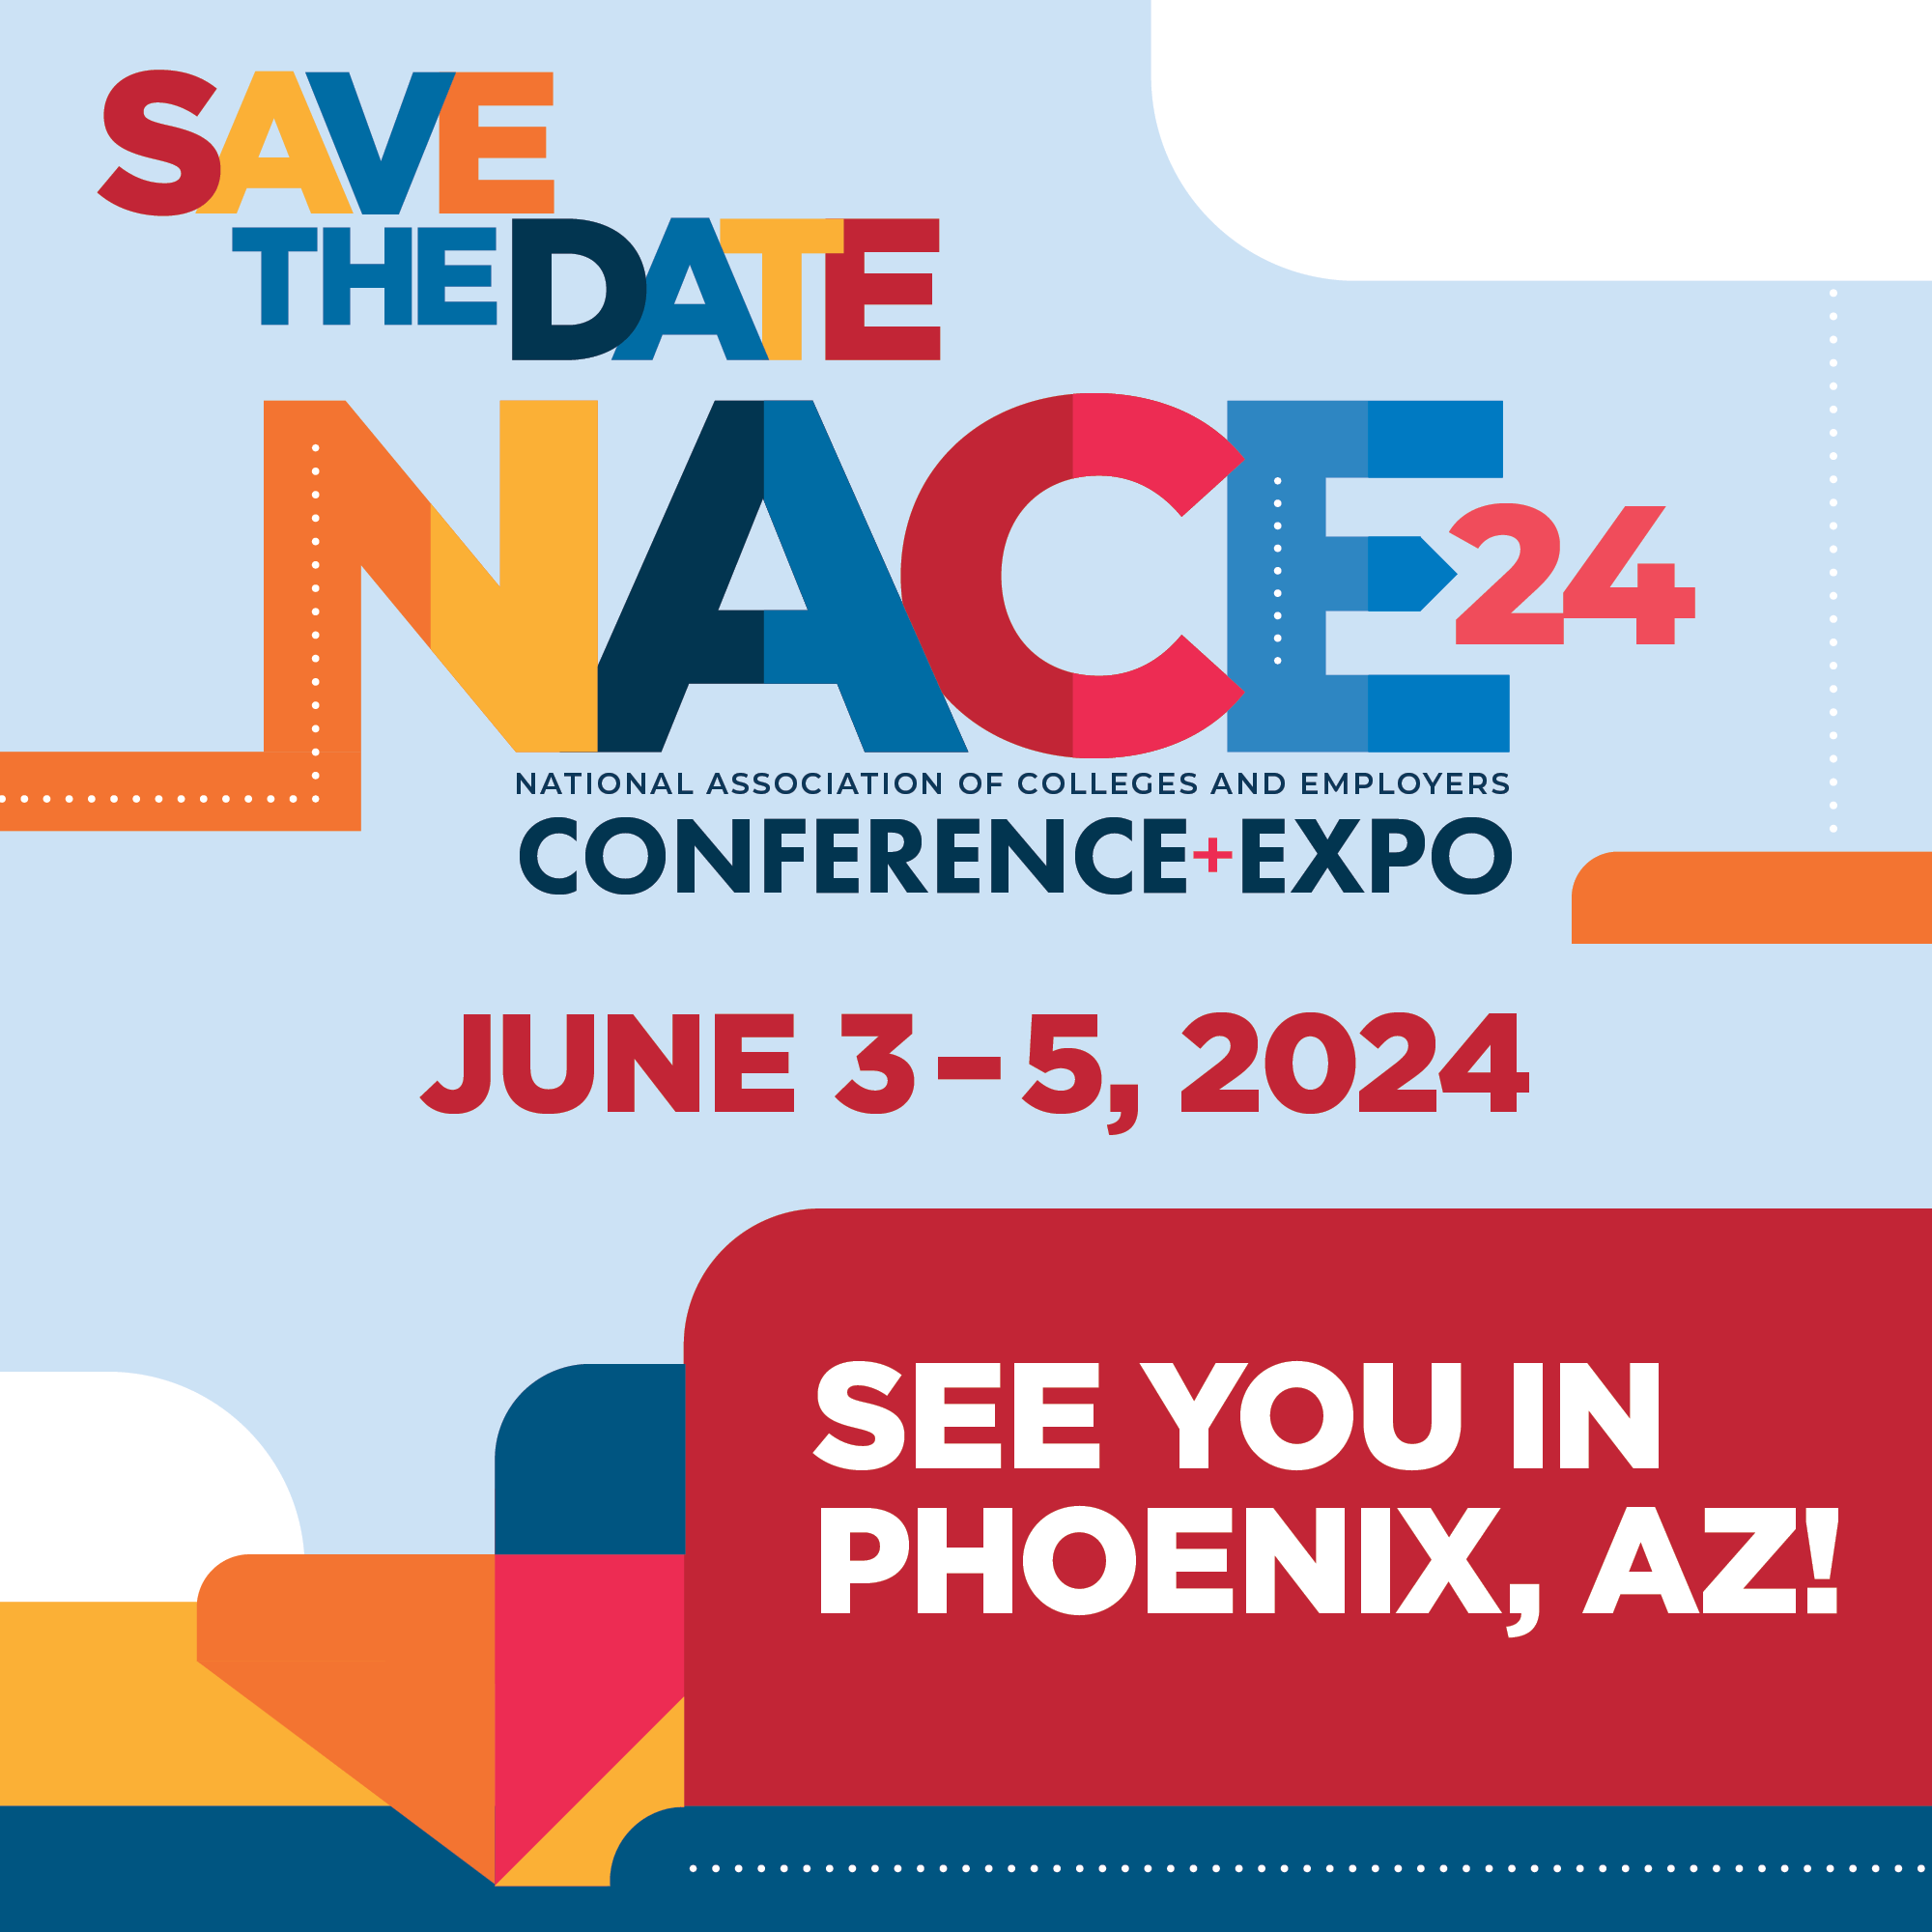 Save the date for NACE23!